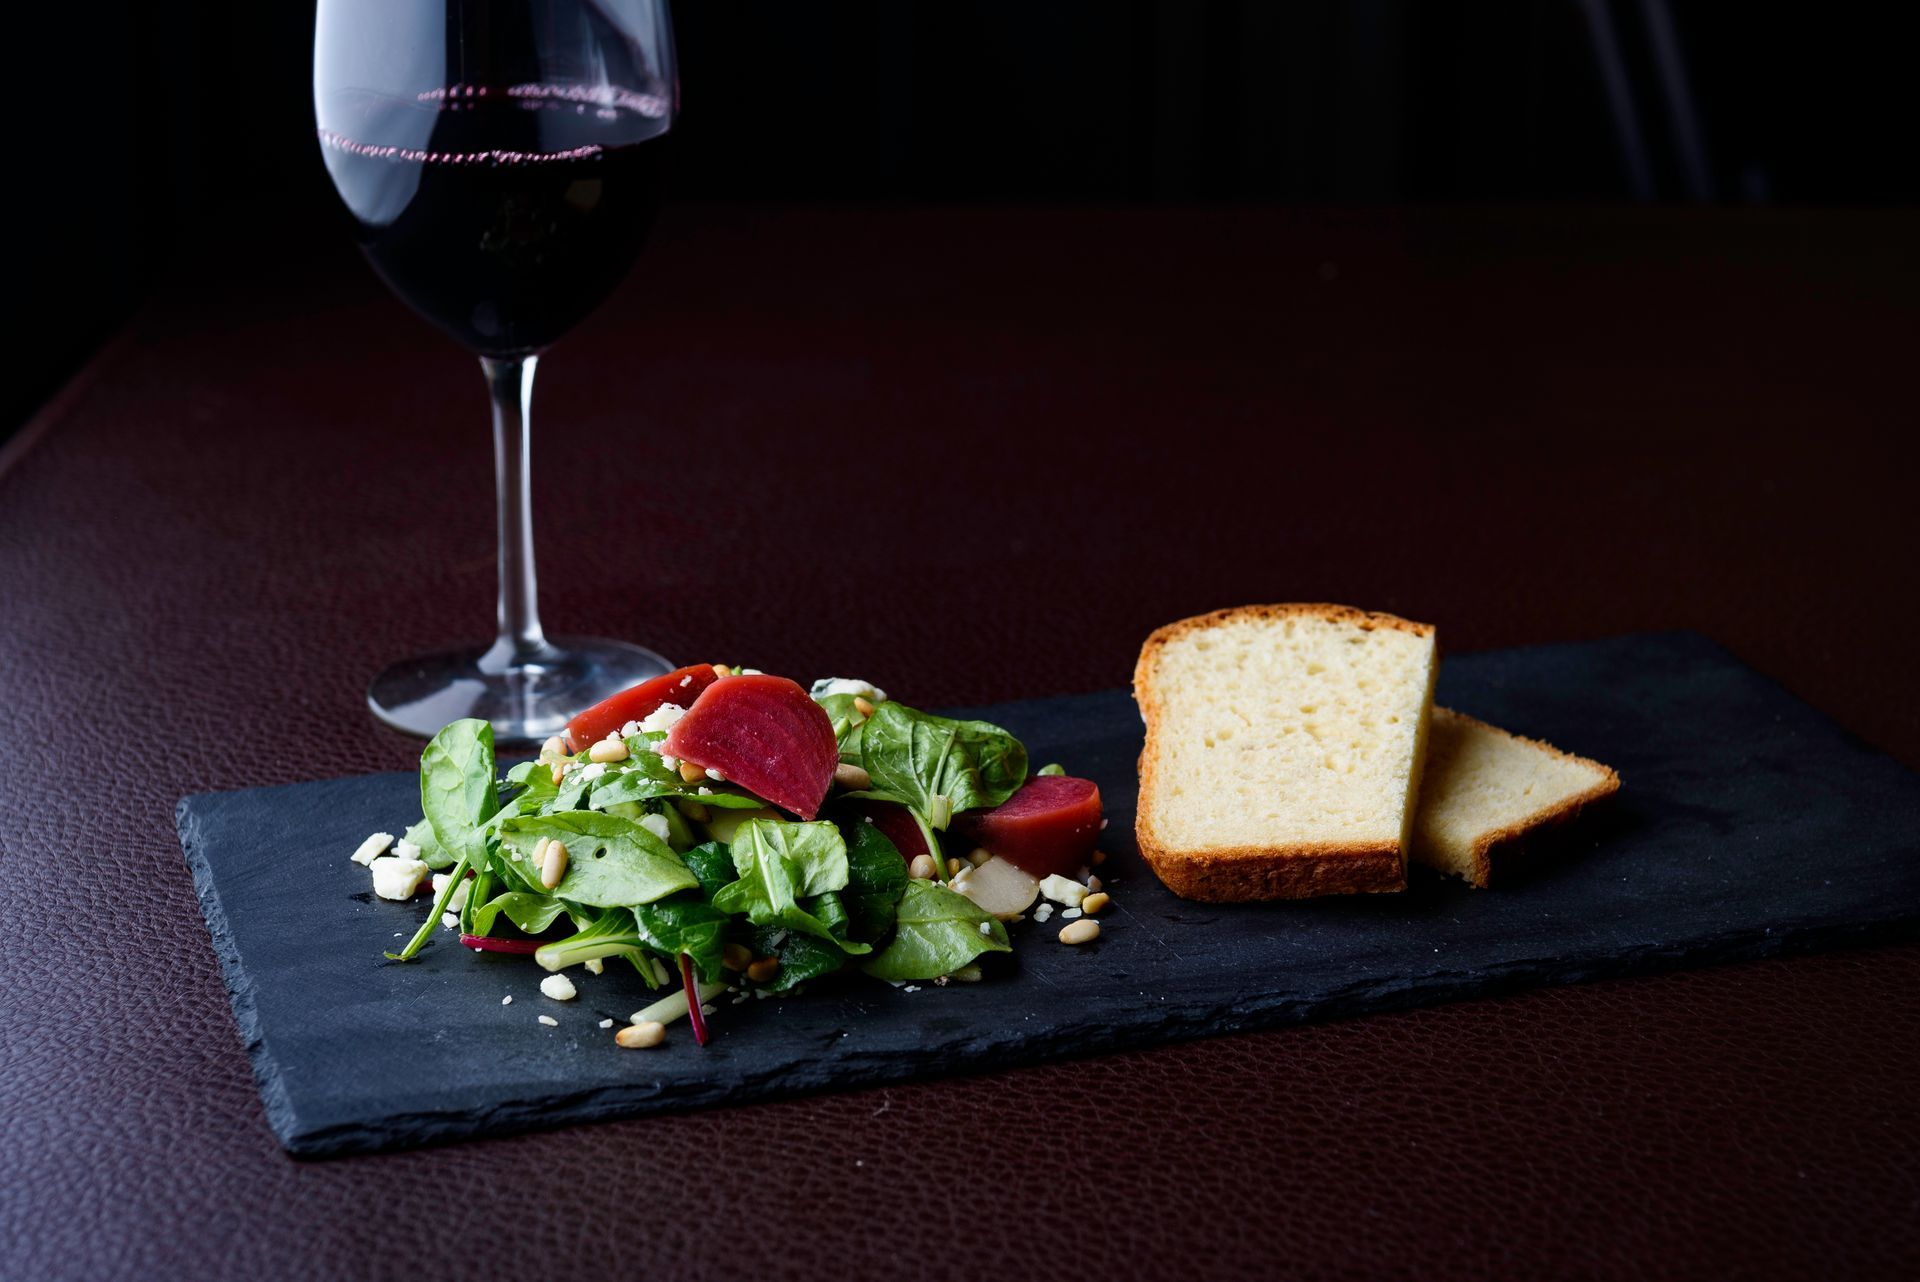 A salad and bread are on a cutting board next to a glass of wine.